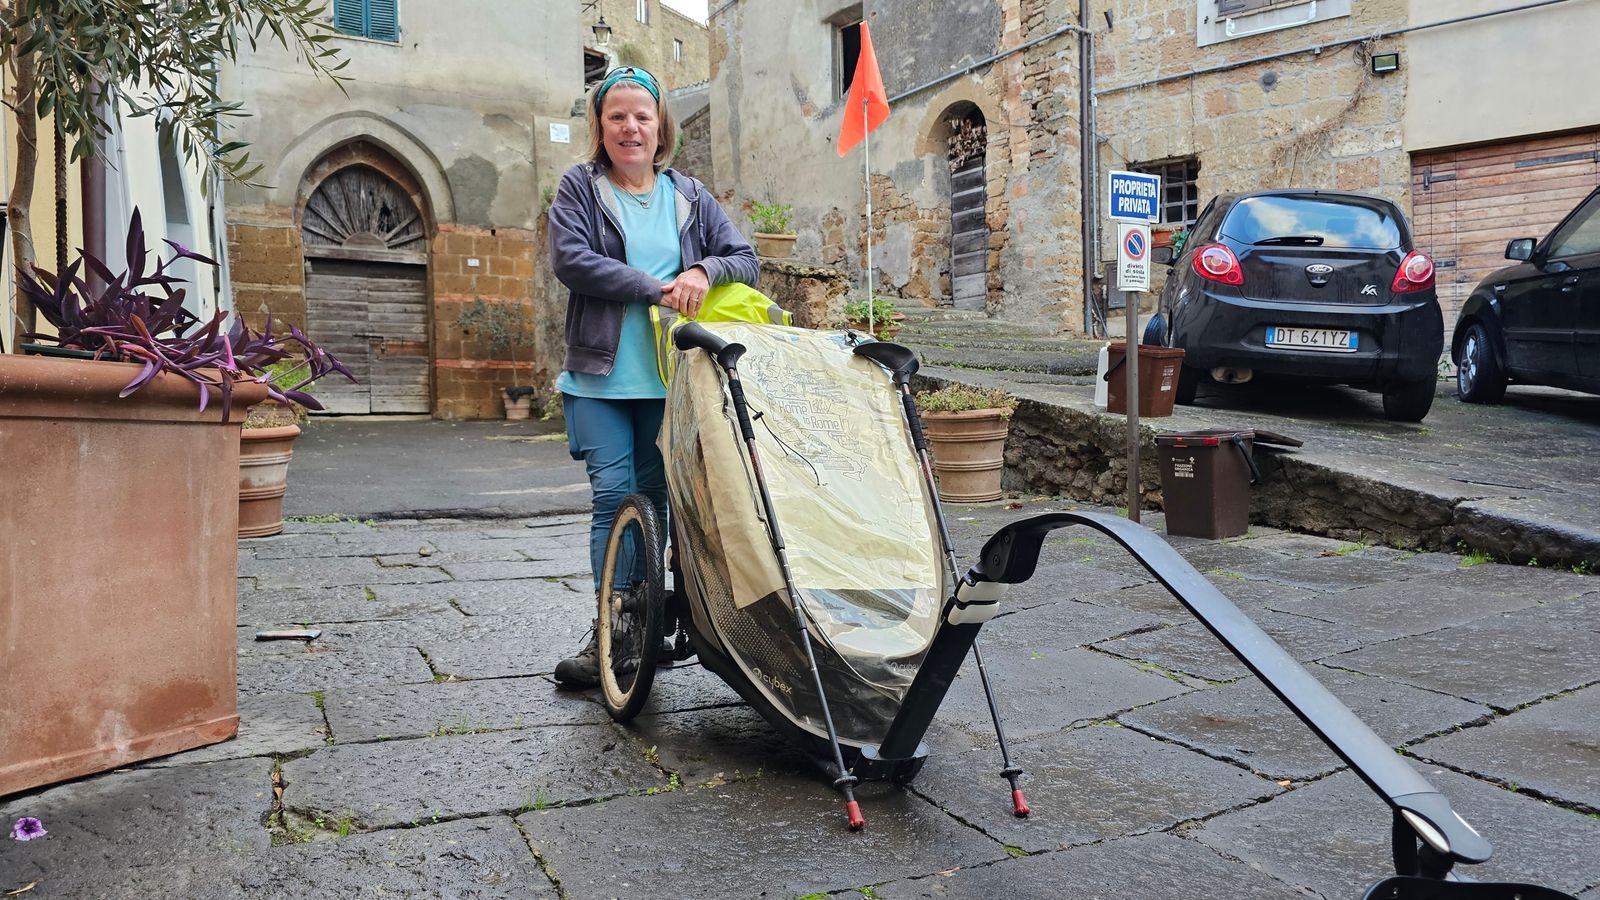 Geraldine McFaul meets the Pope after six-month walk from Glasgow to Rome